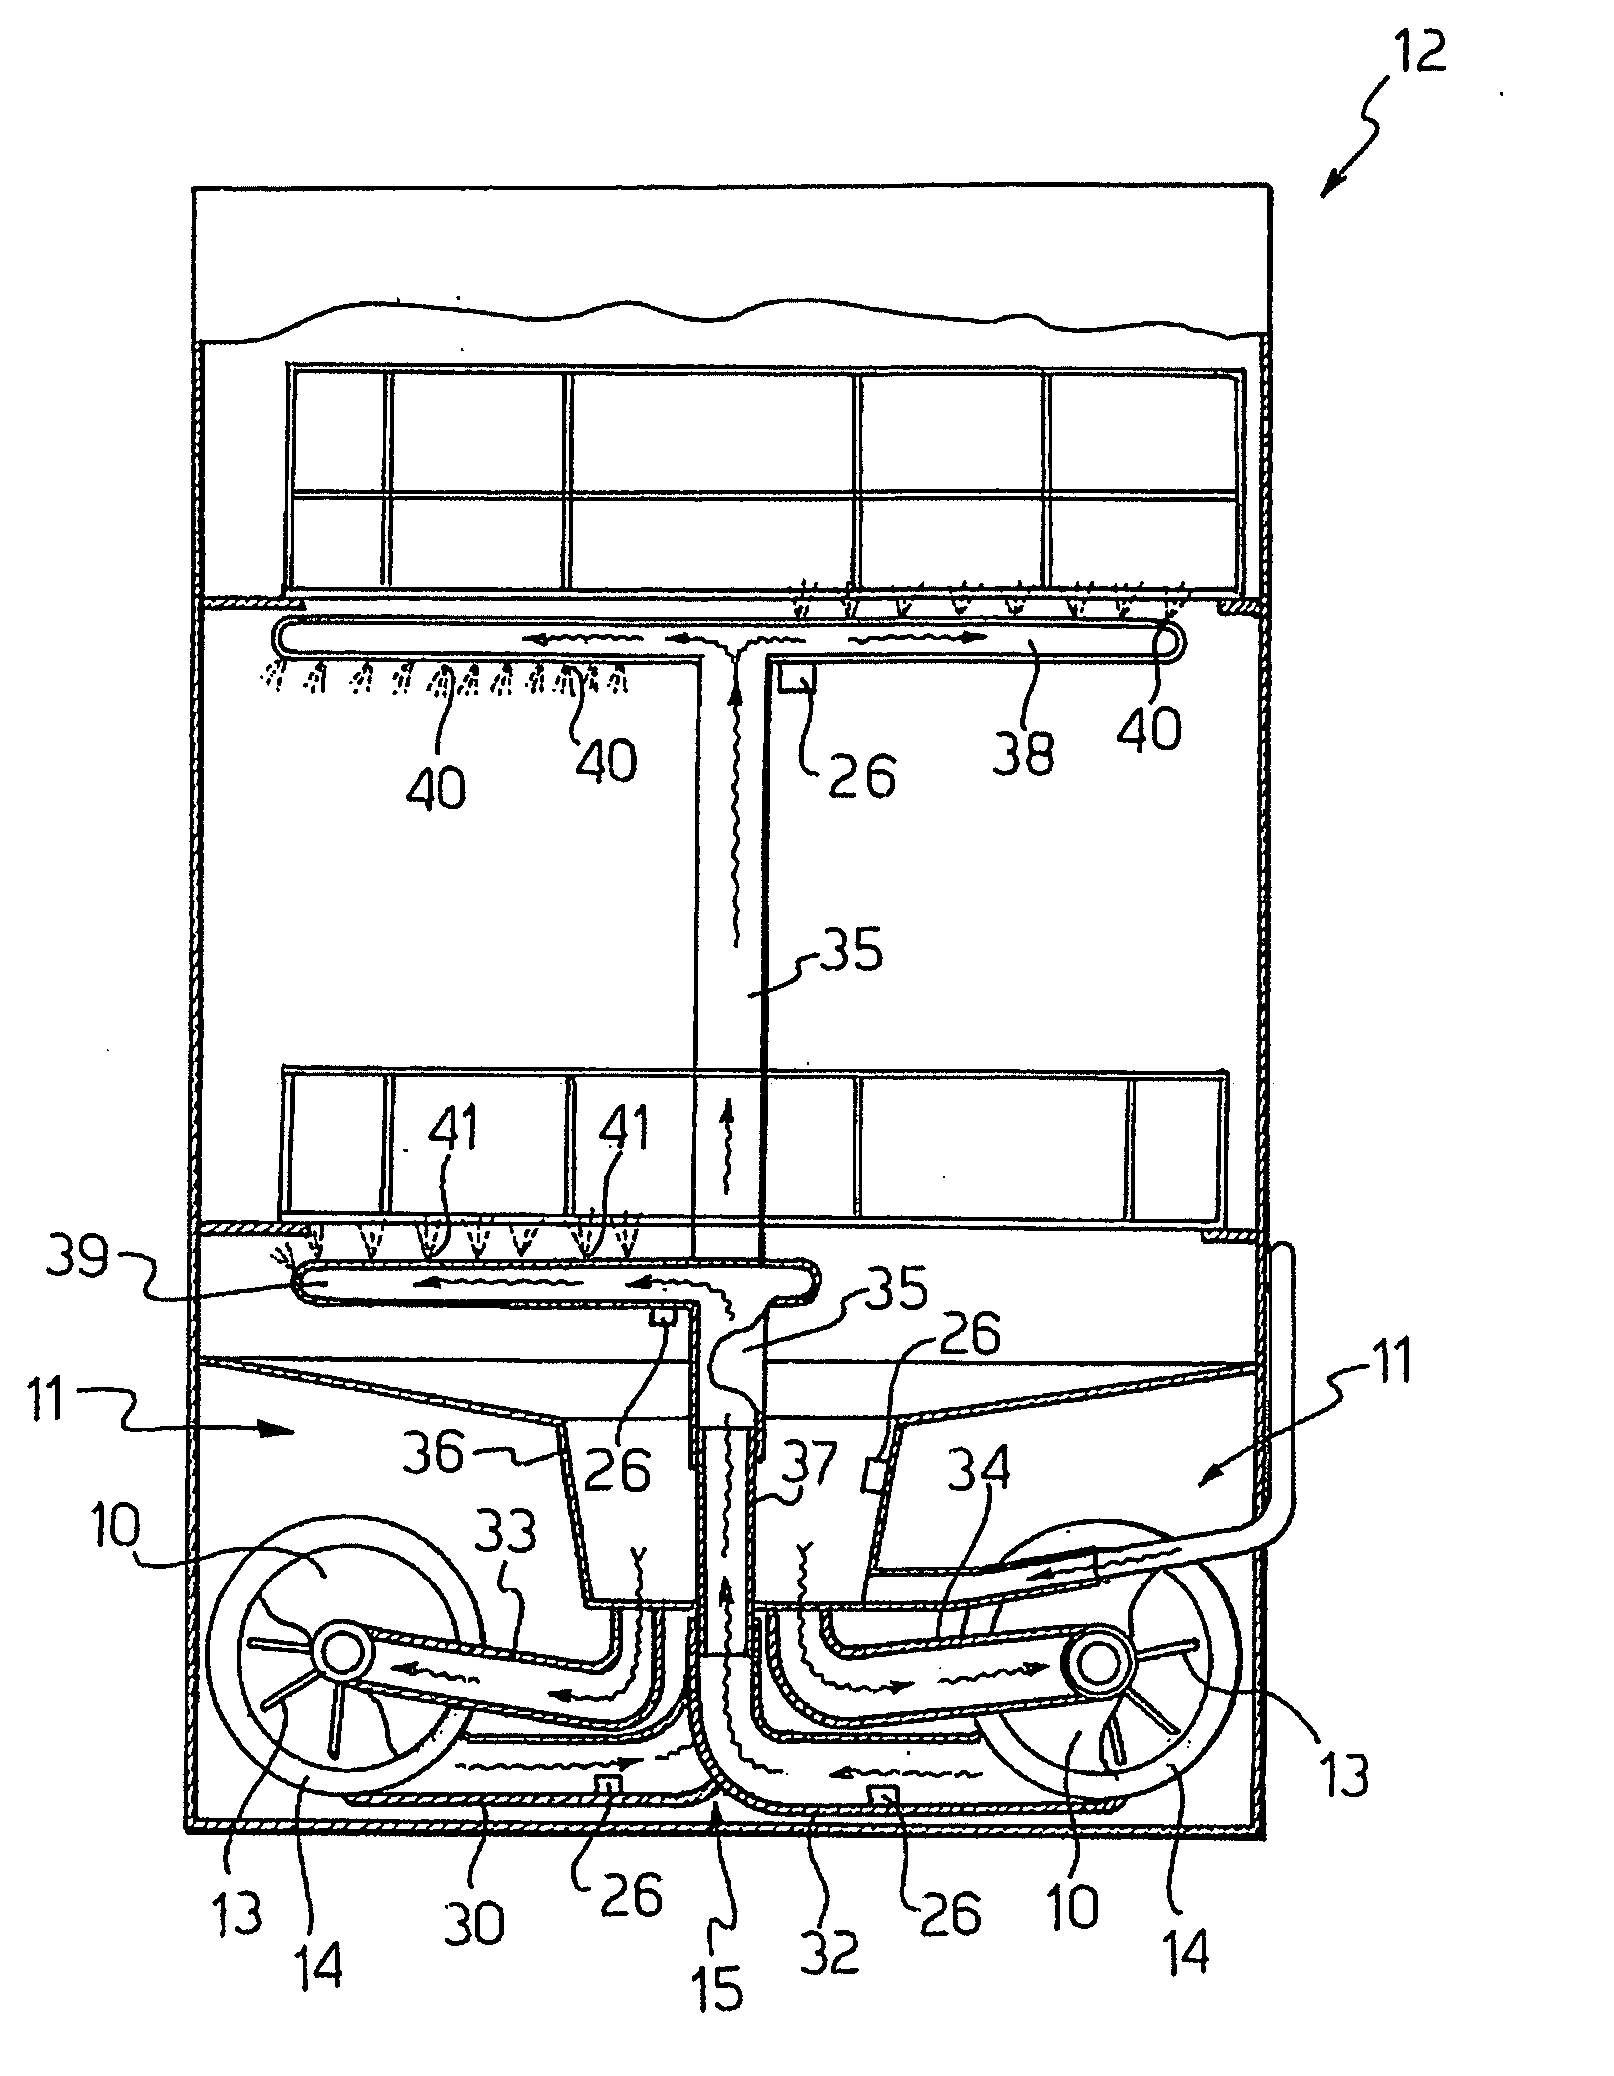 Method for driving a bidirectional motor to rotate a fluid circulation pump